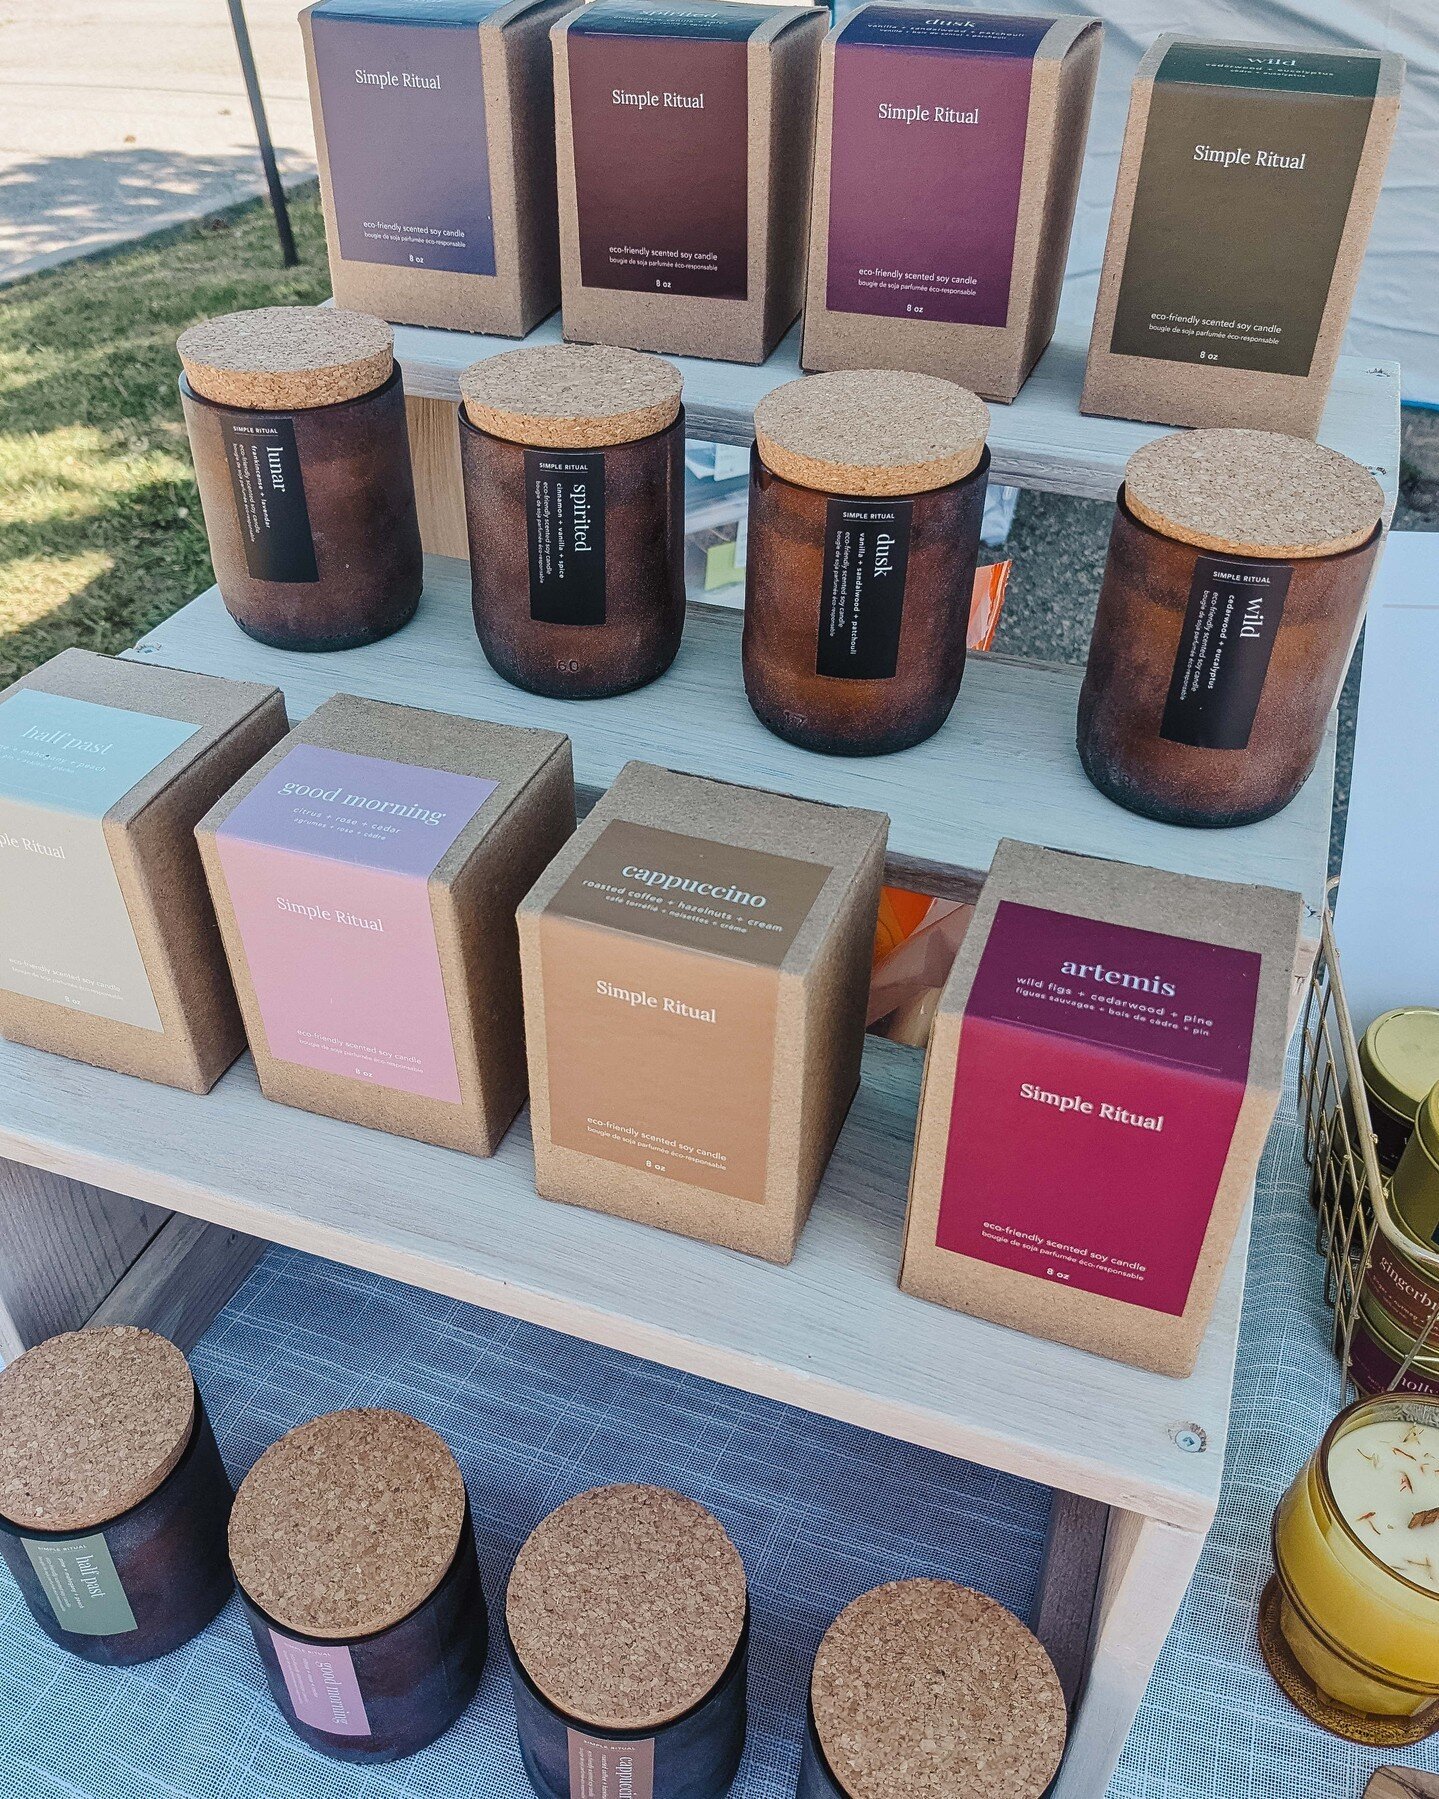 Hey there east end friends! Great news, you can continue to shop Simple Ritual at @themakershubofcanada from now until the end of the year! We love partnering with local retail stores to bring you one step closer to smelling our candles IRL.